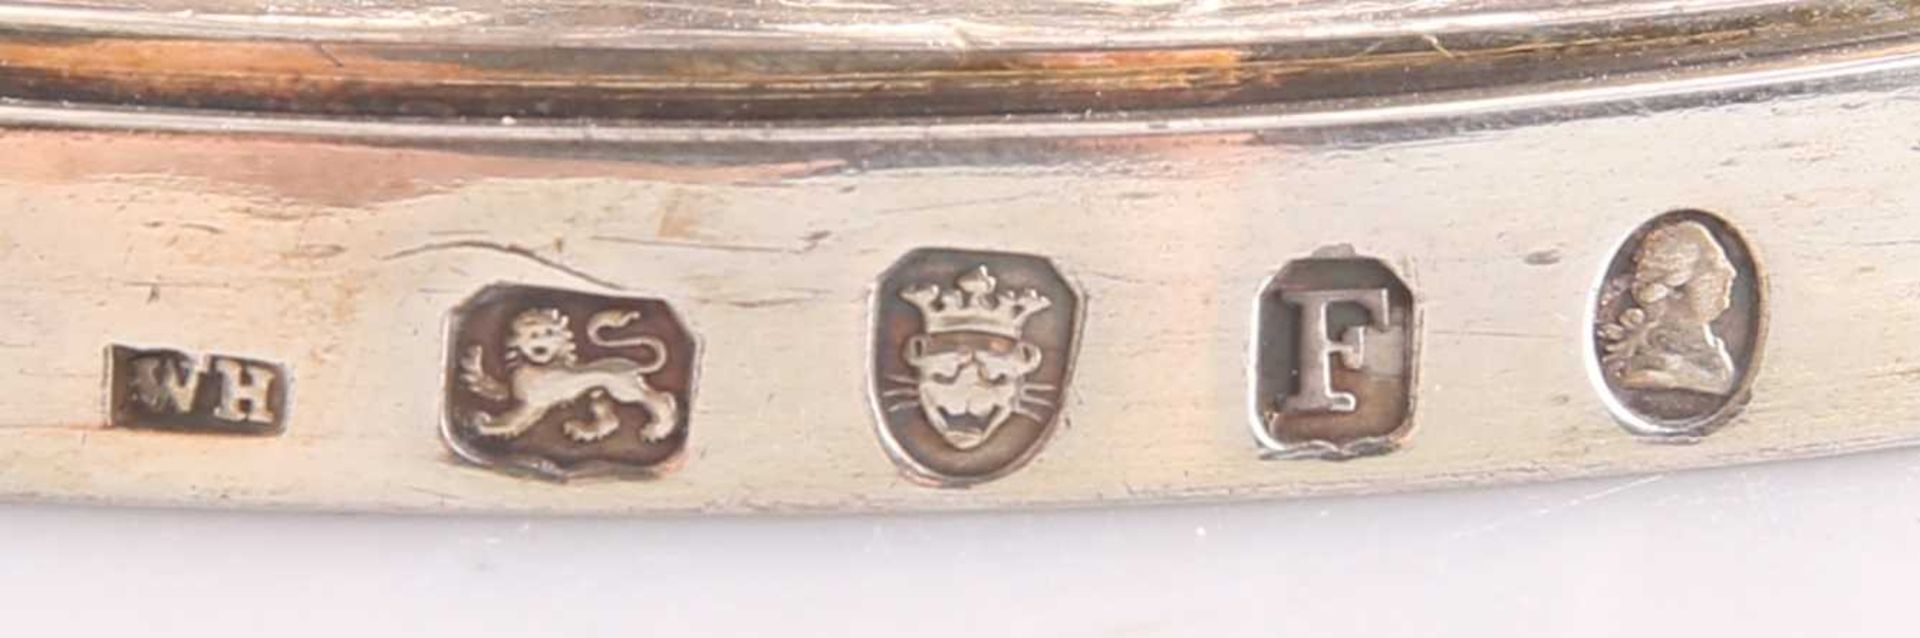 A GEORGE III SILVER-GILT TWO-HANDLED CUP AND COVER - Image 5 of 5